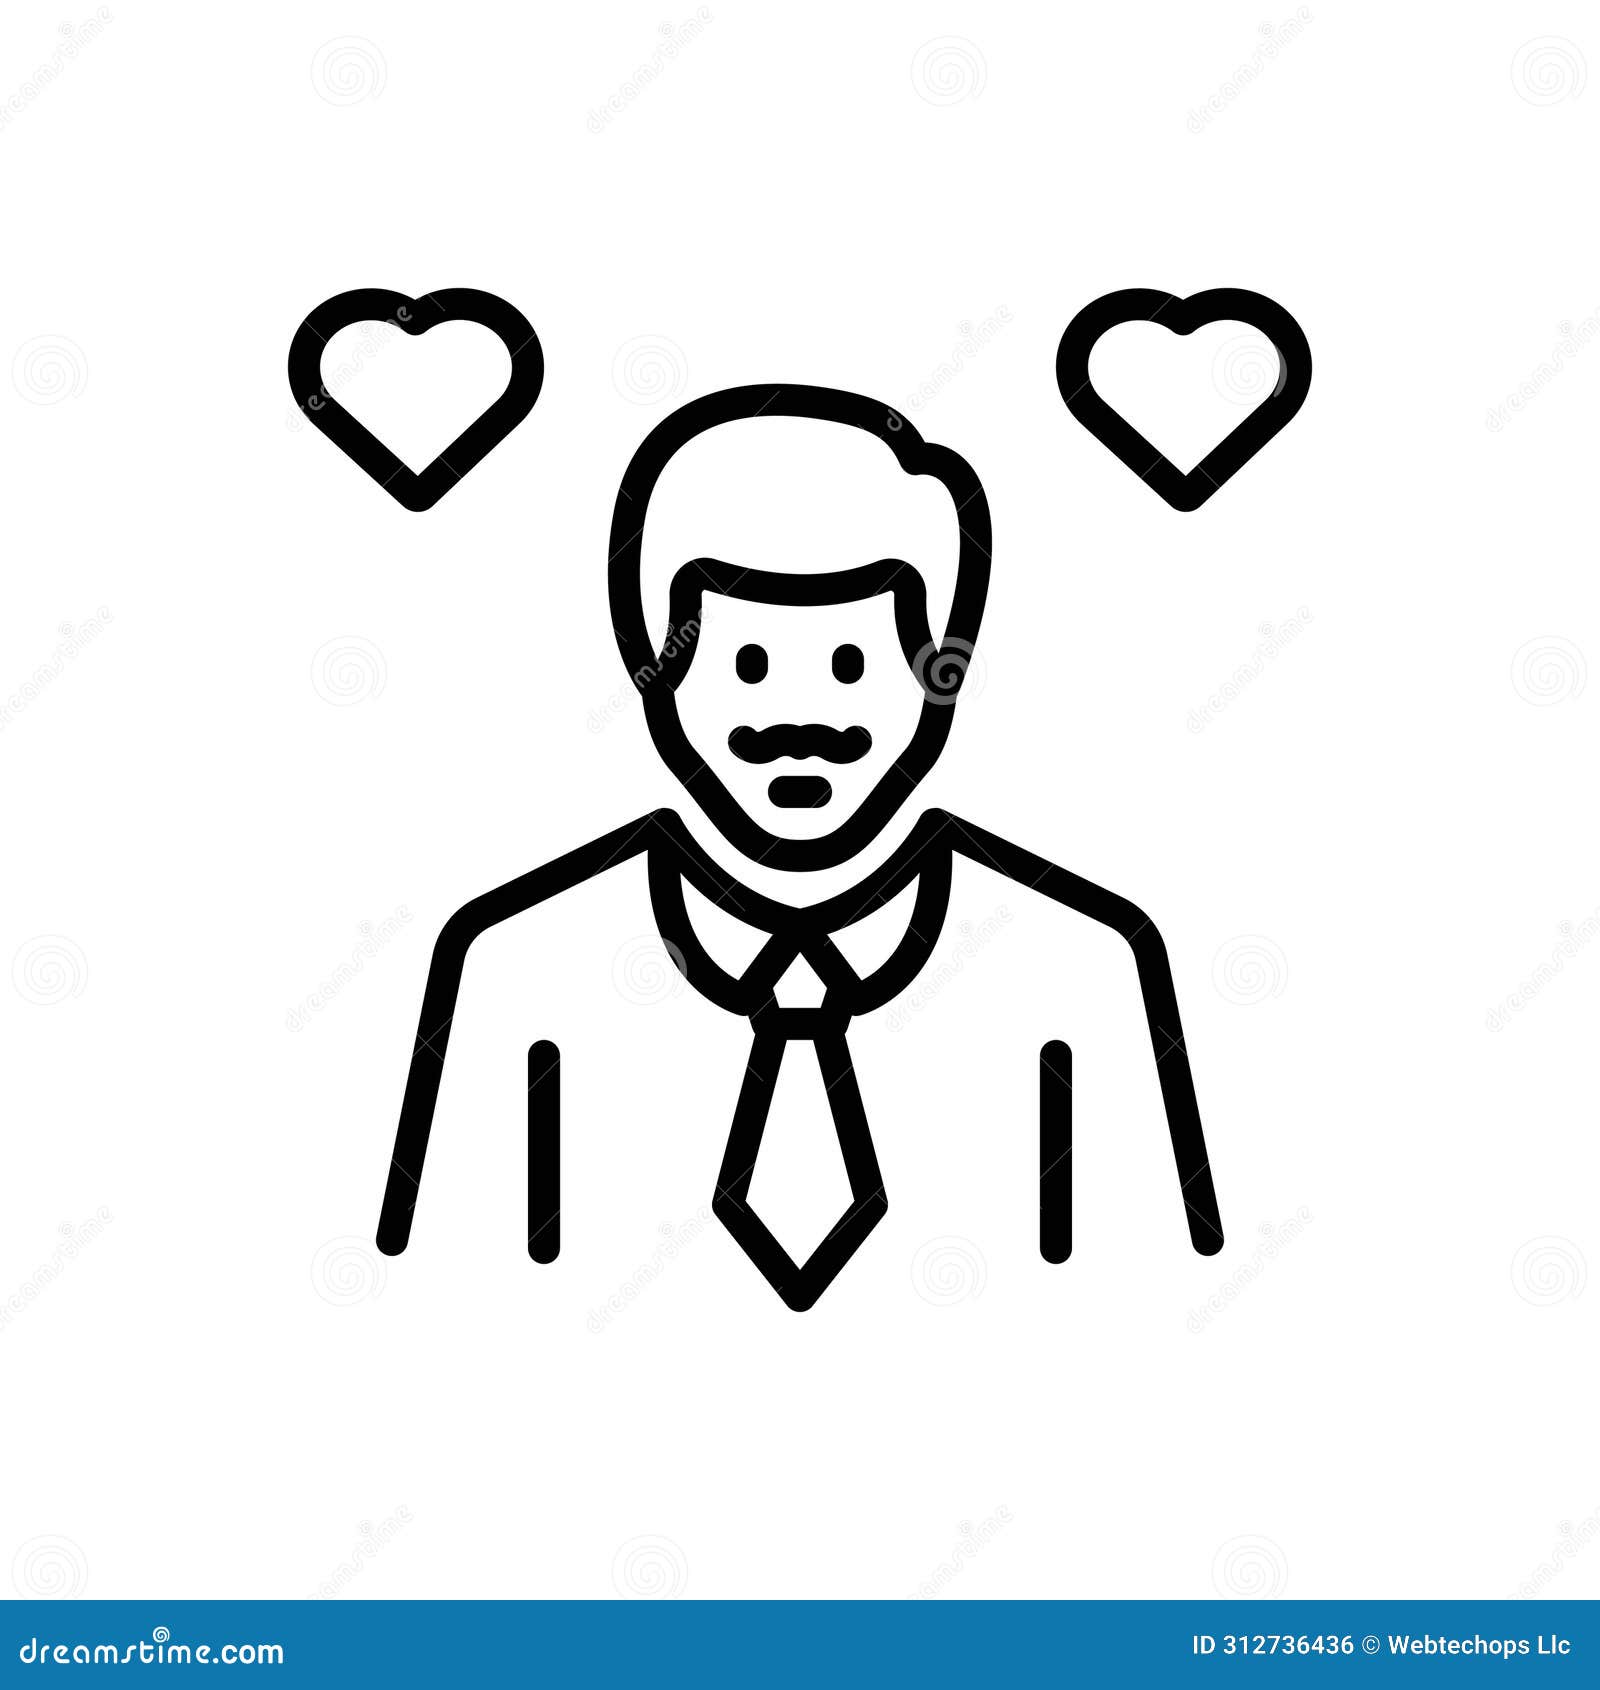 black line icon for daddy, male parent and human